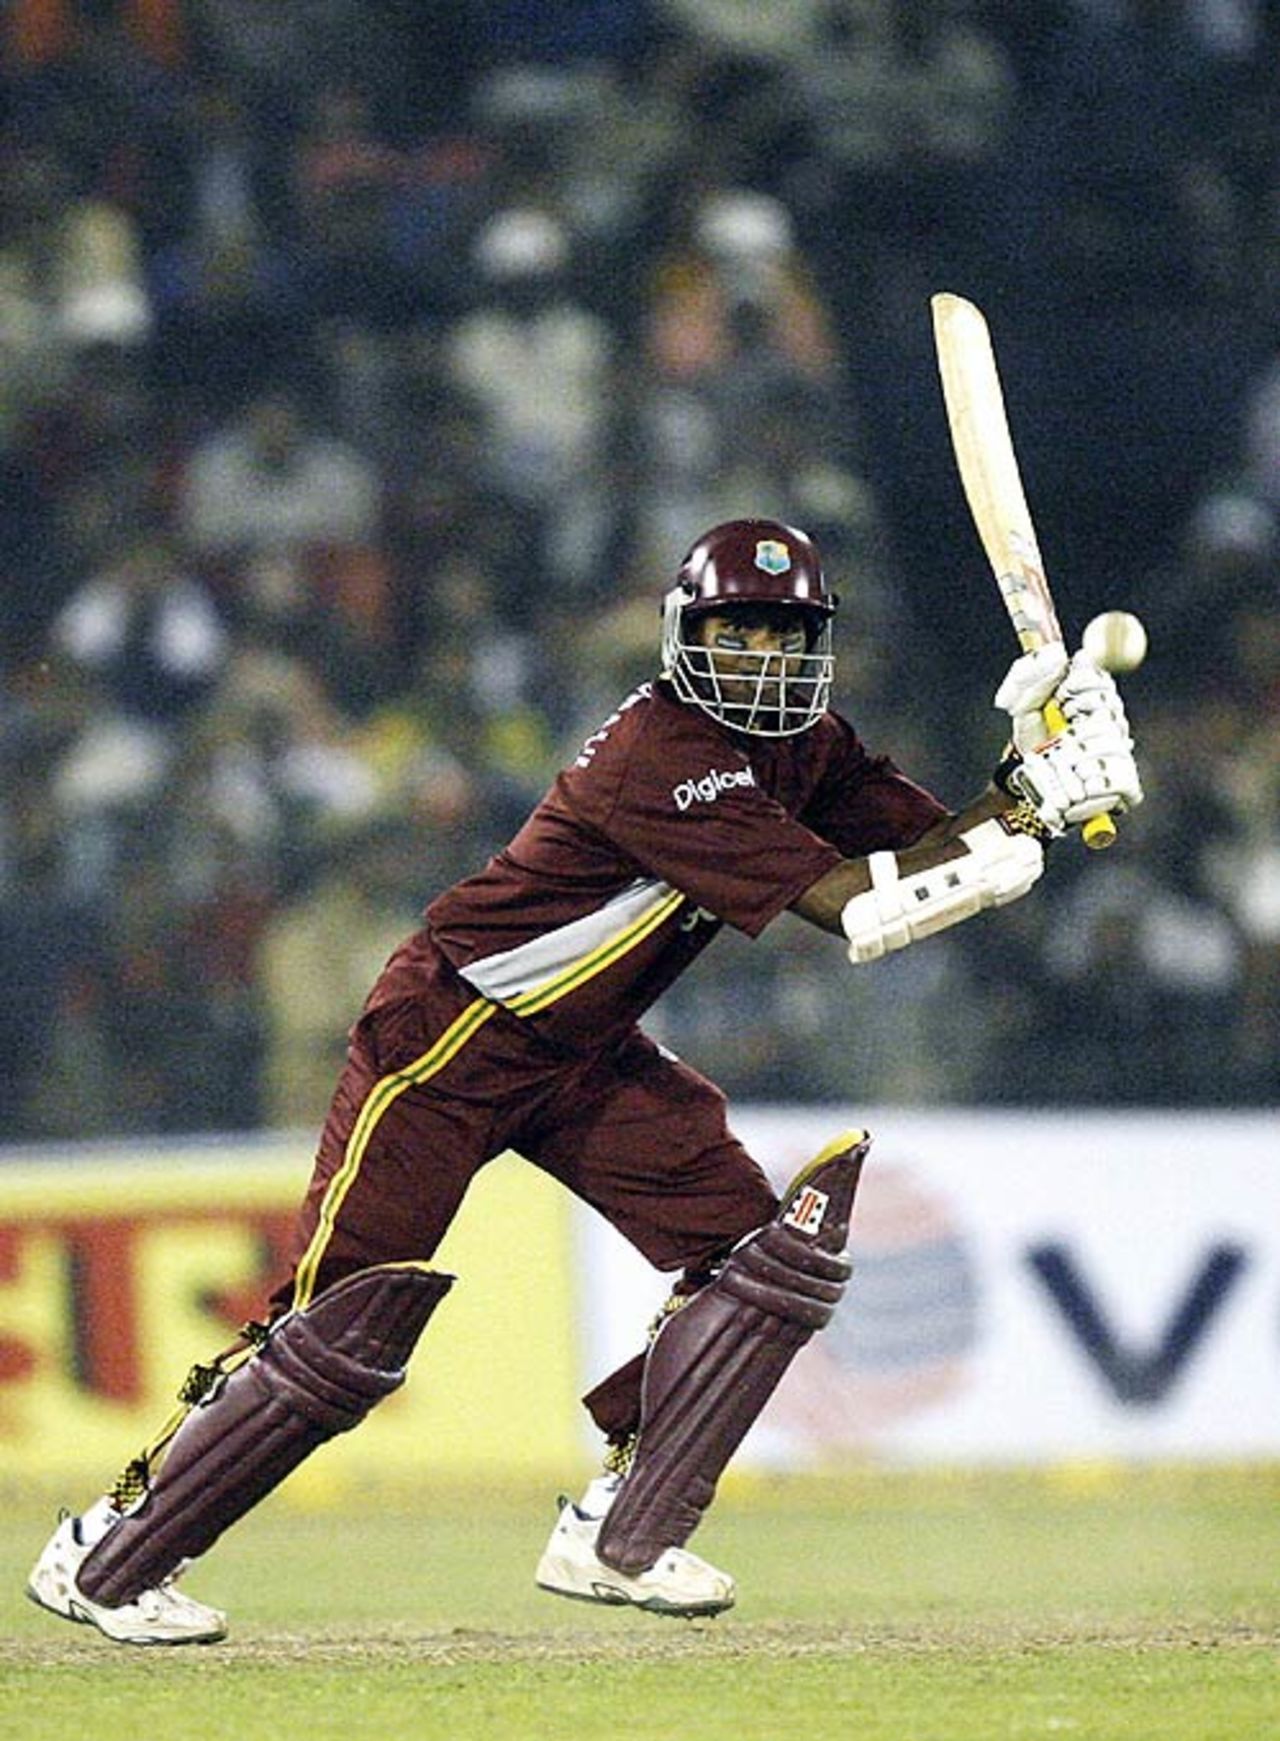 Shivnarine Chanderpaul drives during his fifty, India v West Indies, 2nd ODI, Cuttack, January 24, 2007